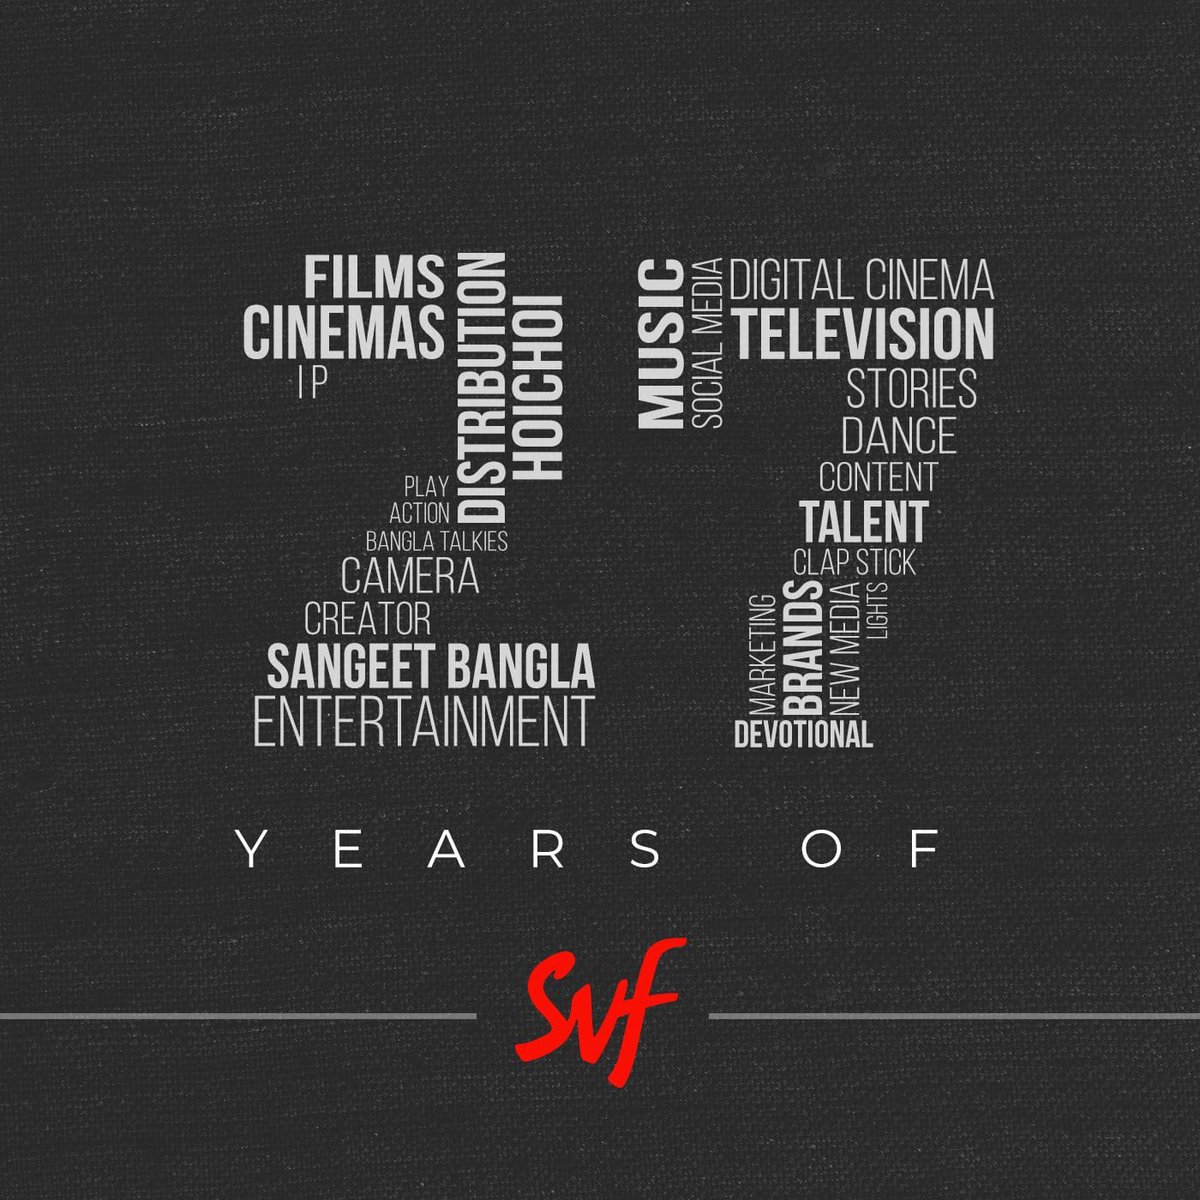 THE LEADING PRODUCTION HOUSE OF WEST BENGAL *#ShreeVenkteshFilms* aka *_#SVF_* COMPLETED 27 YEARS TODAY! 
Take a look of there upcoming line-up: 
#BoglaMama*: AUG 2023
#DawshomAwbotaar*: OCT 2023
#Kabuliwala*: DEC 2023
#Othoi*: JAN 2024 @SVFsocial @iammony